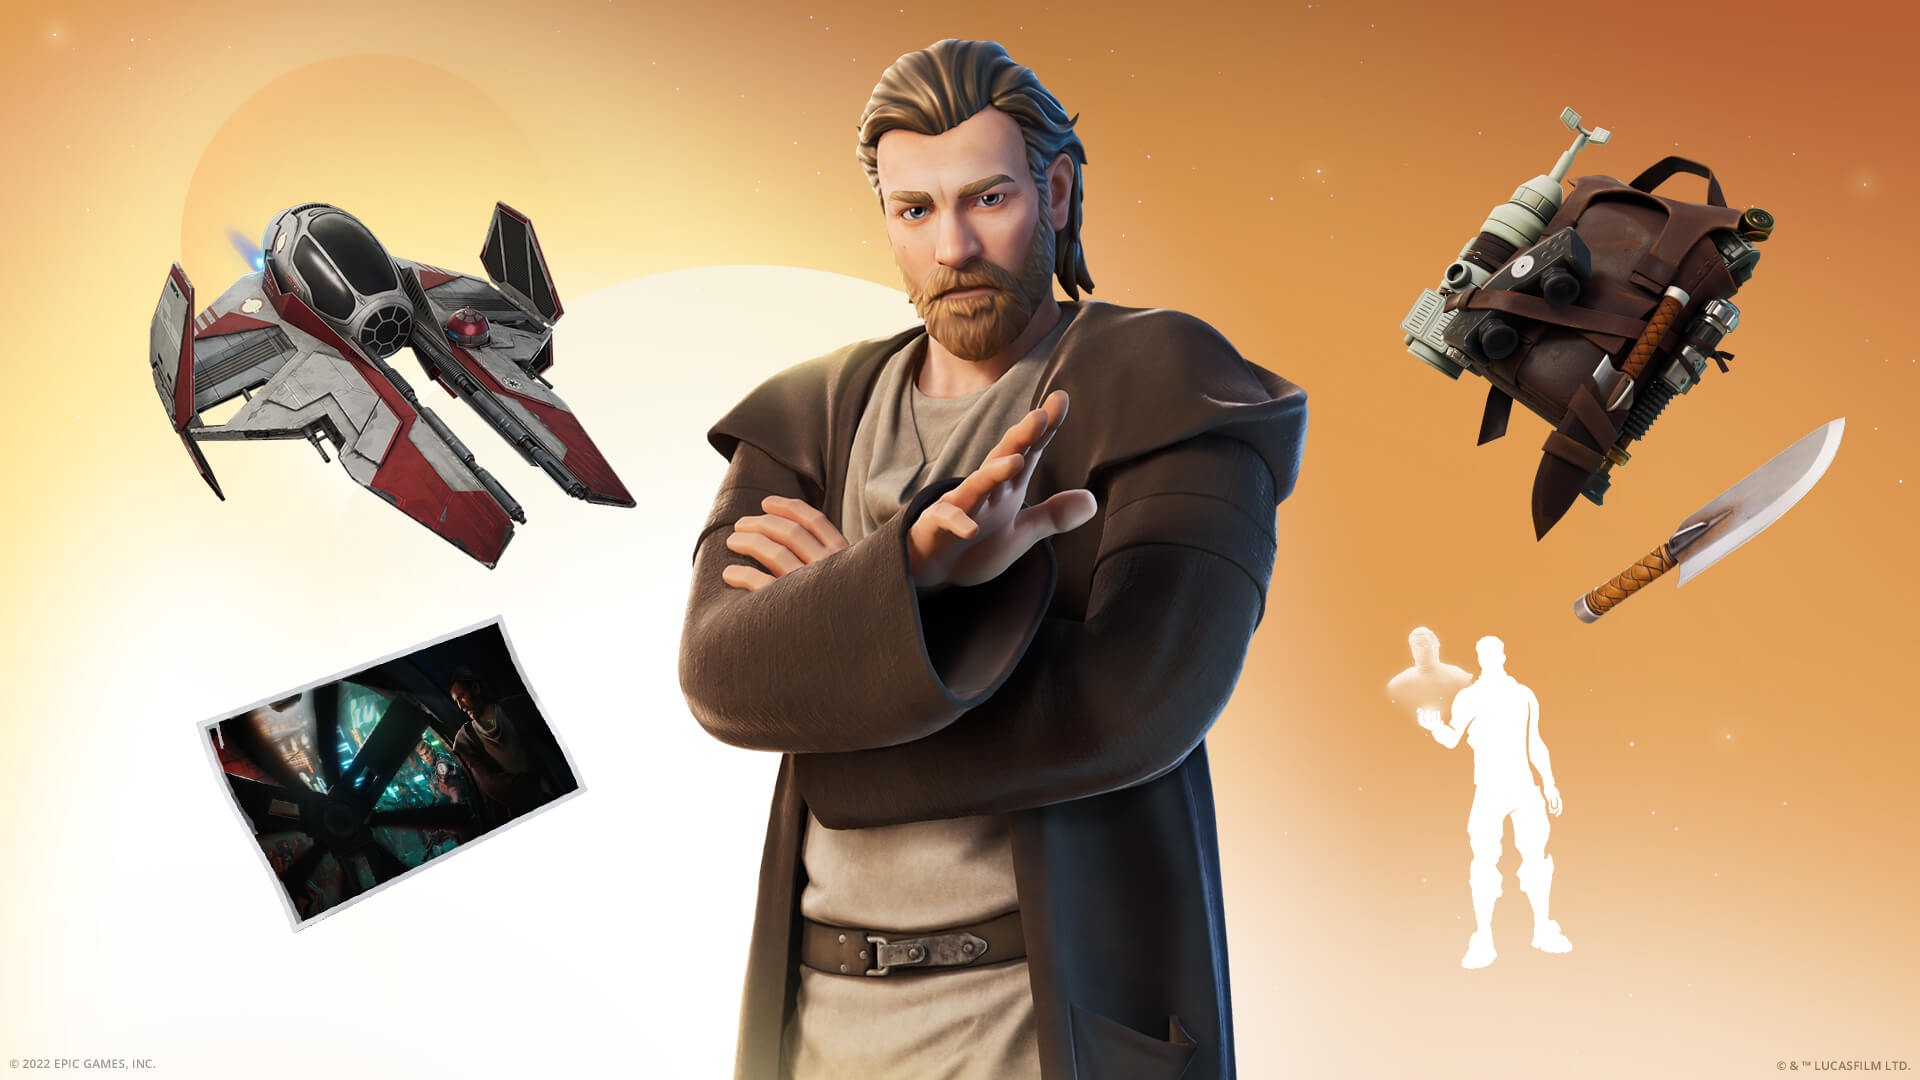 Image for Obi-Wan Kenobi is now in Fortnite, although you can't use his lightsaber